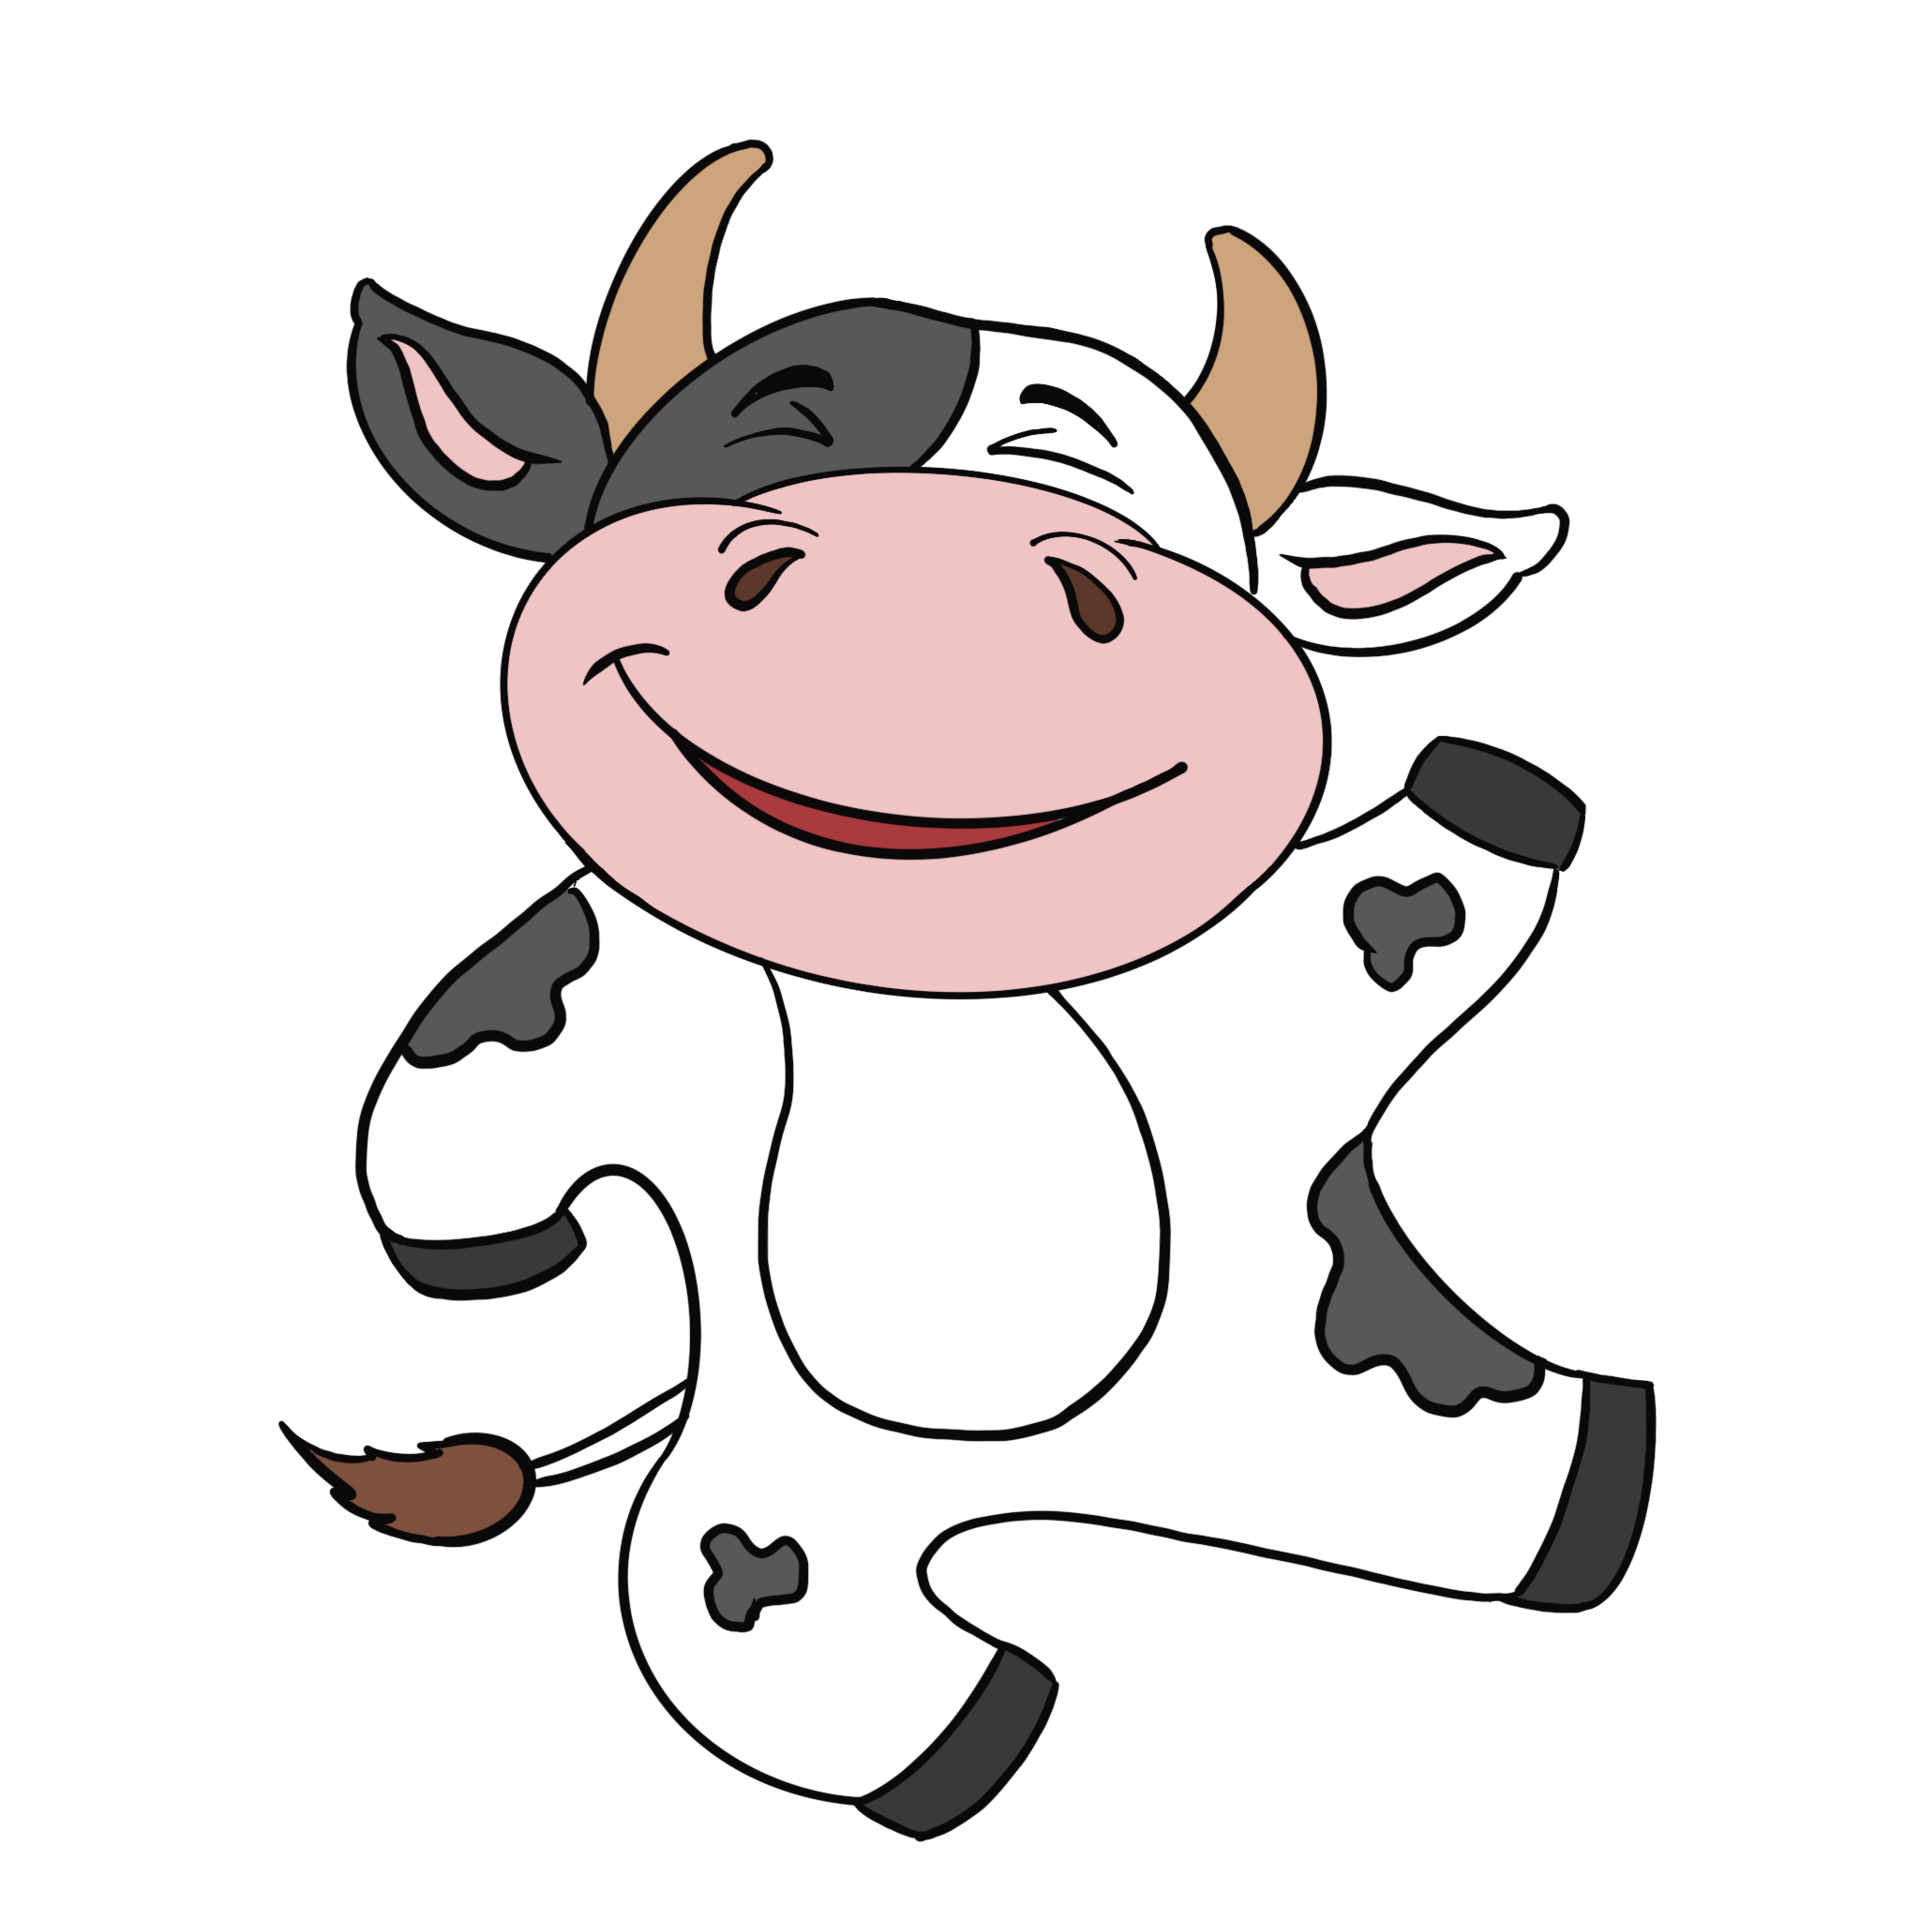 Free Doodle cartoon character cow, black and white color, with a smile and  joyful mood. 16330073 PNG with Transparent Background